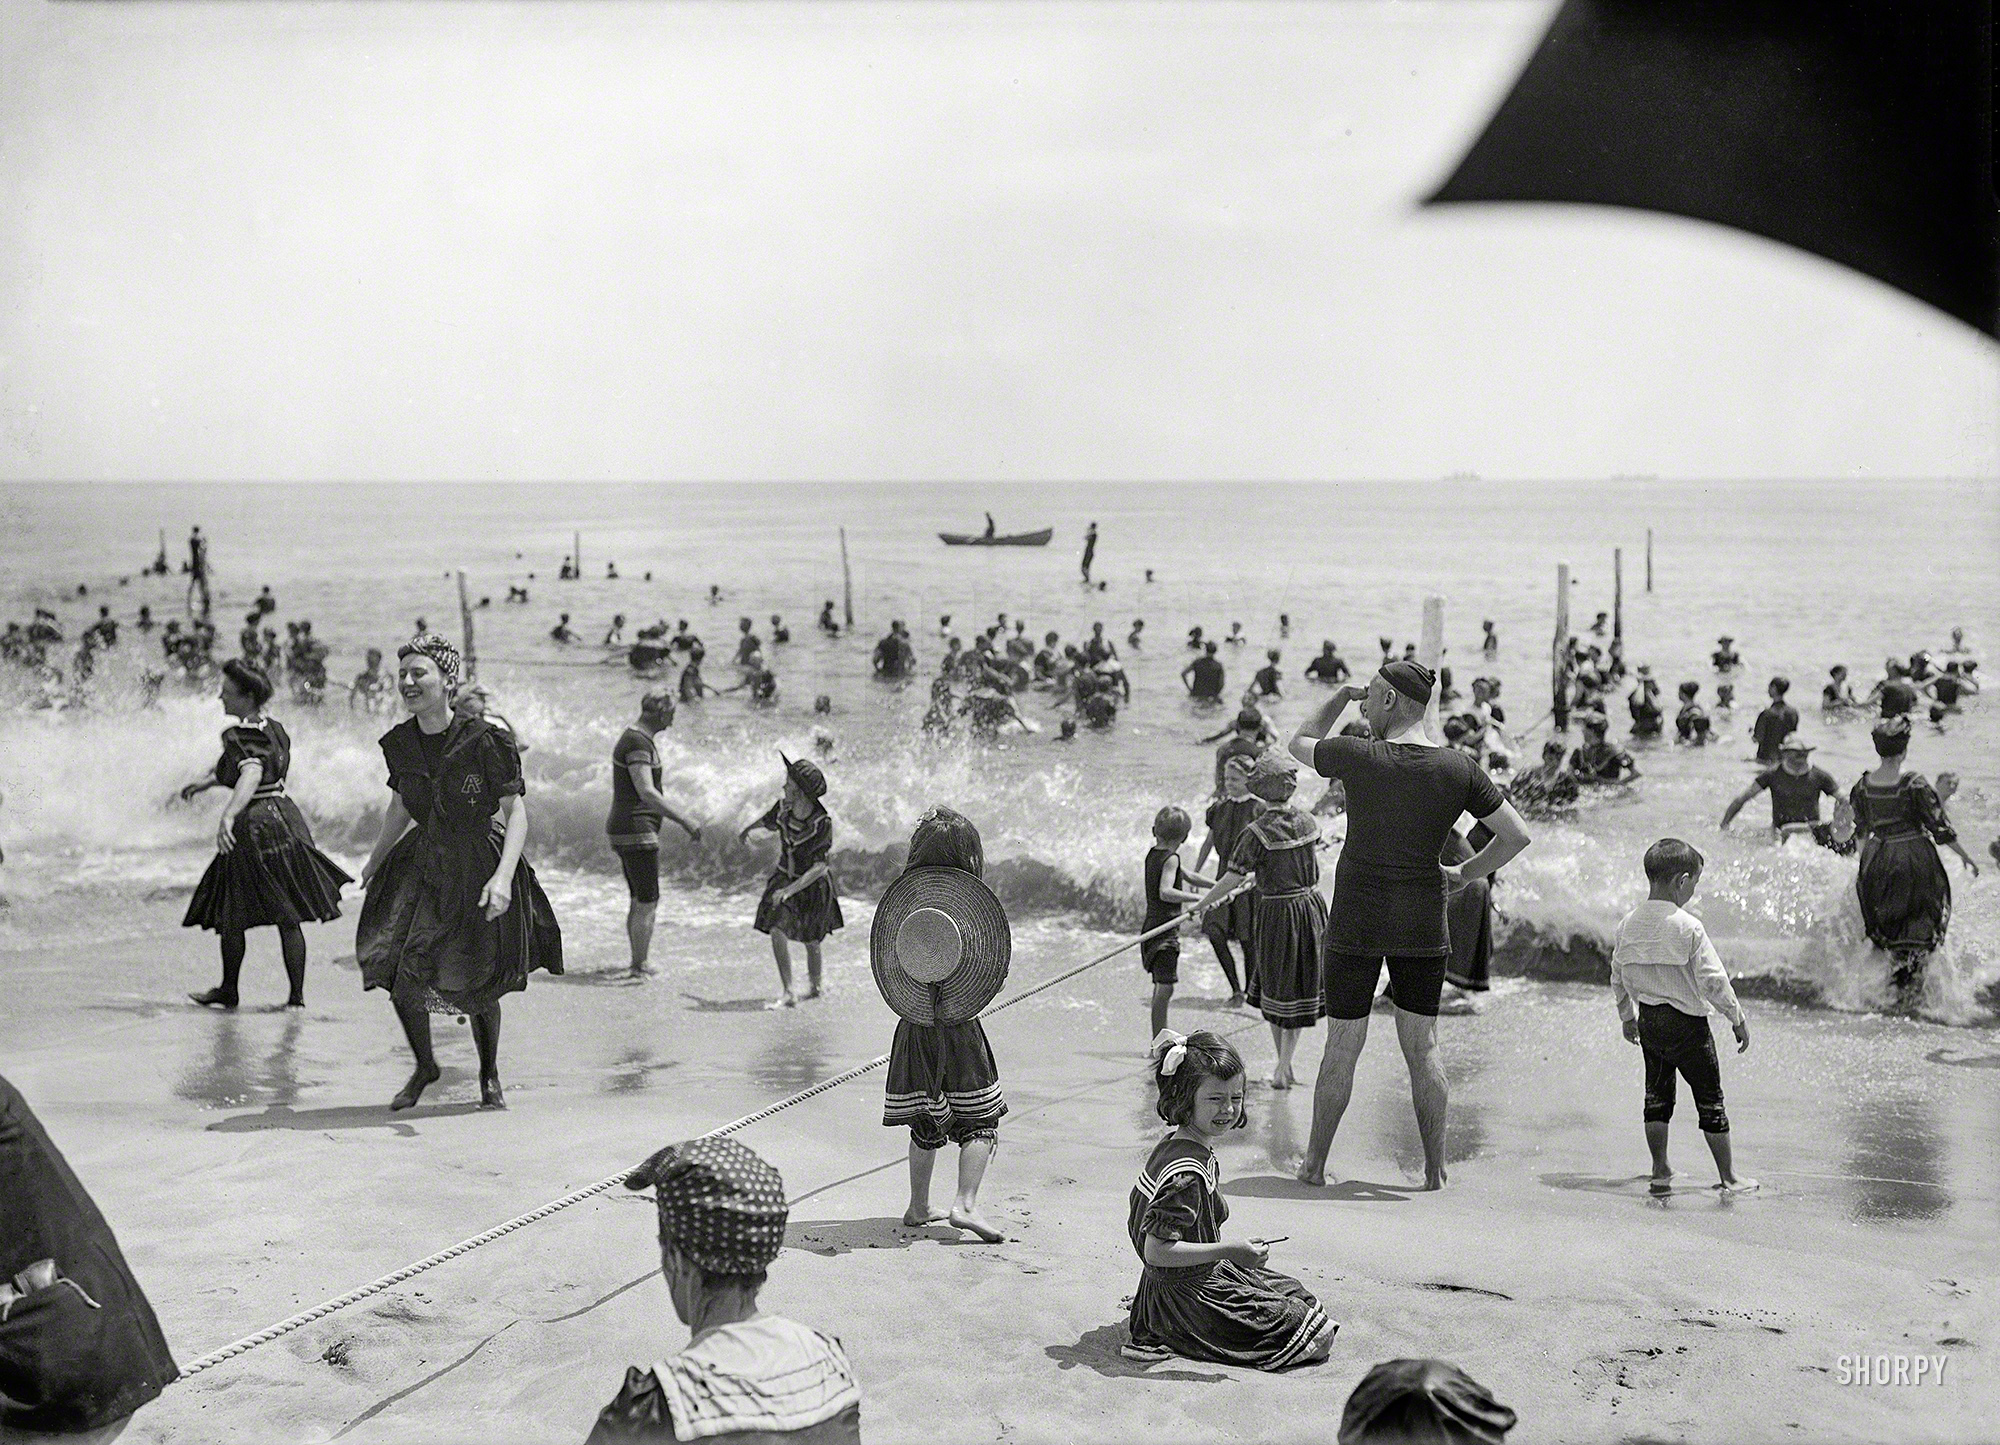 Circa 1910. "Surf bathers at crowded beach, possibly Atlantic City." 8x10 inch dry plate glass negative, Detroit Publishing Company. View full size.